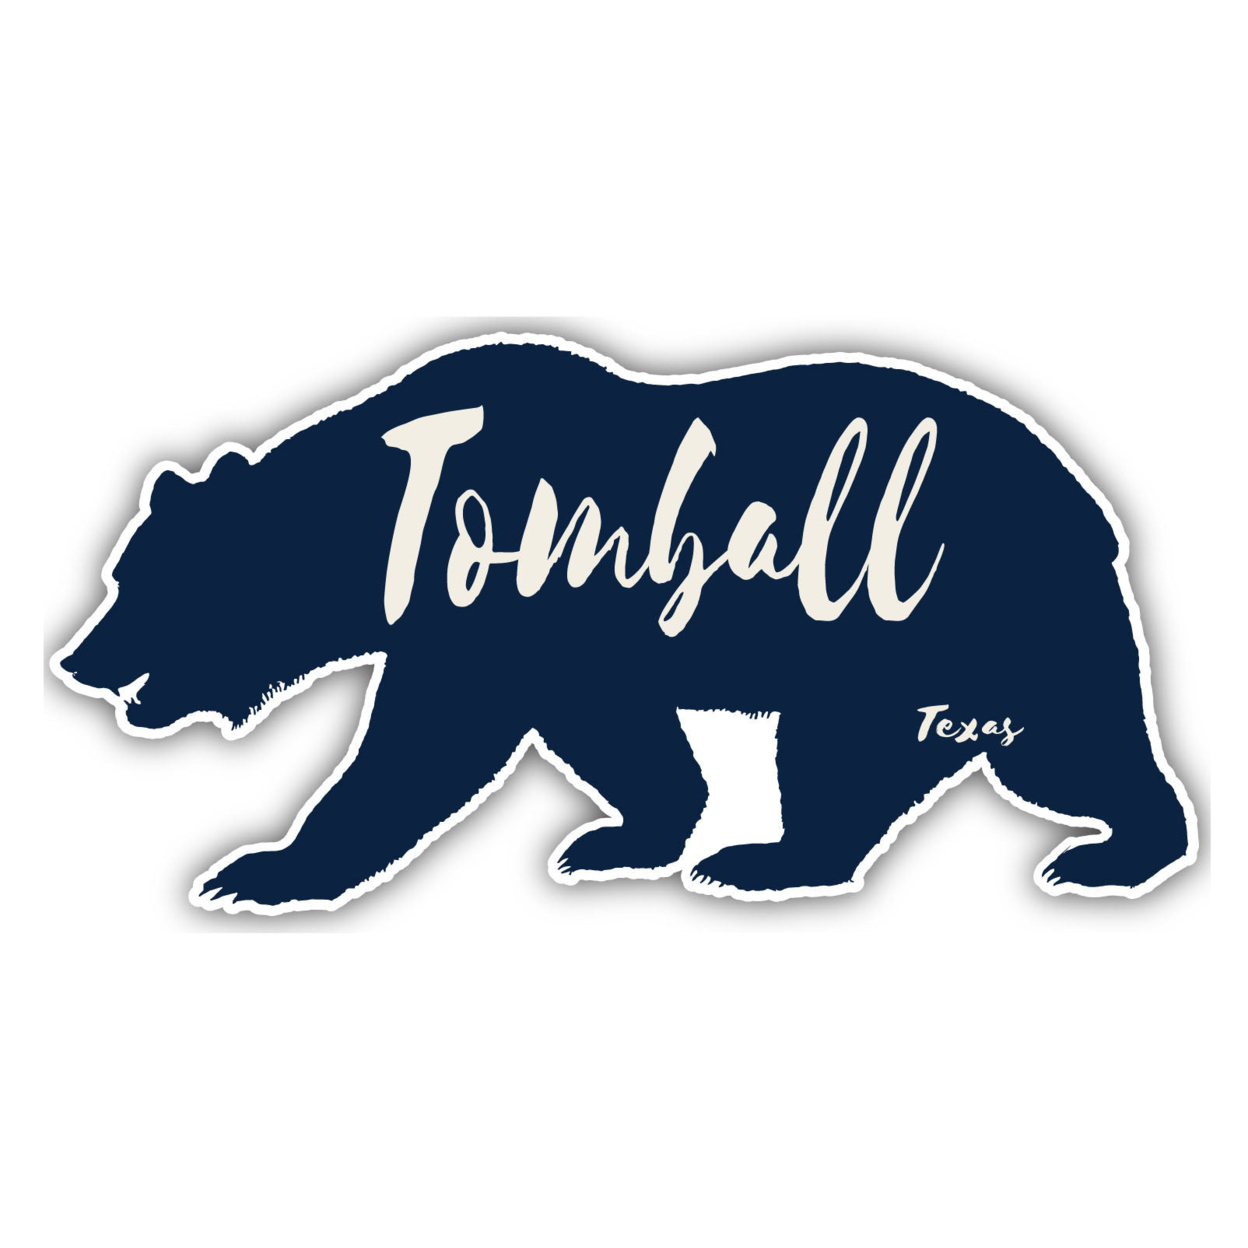 Tomball Texas Souvenir Decorative Stickers (Choose Theme And Size) - Single Unit, 2-Inch, Bear